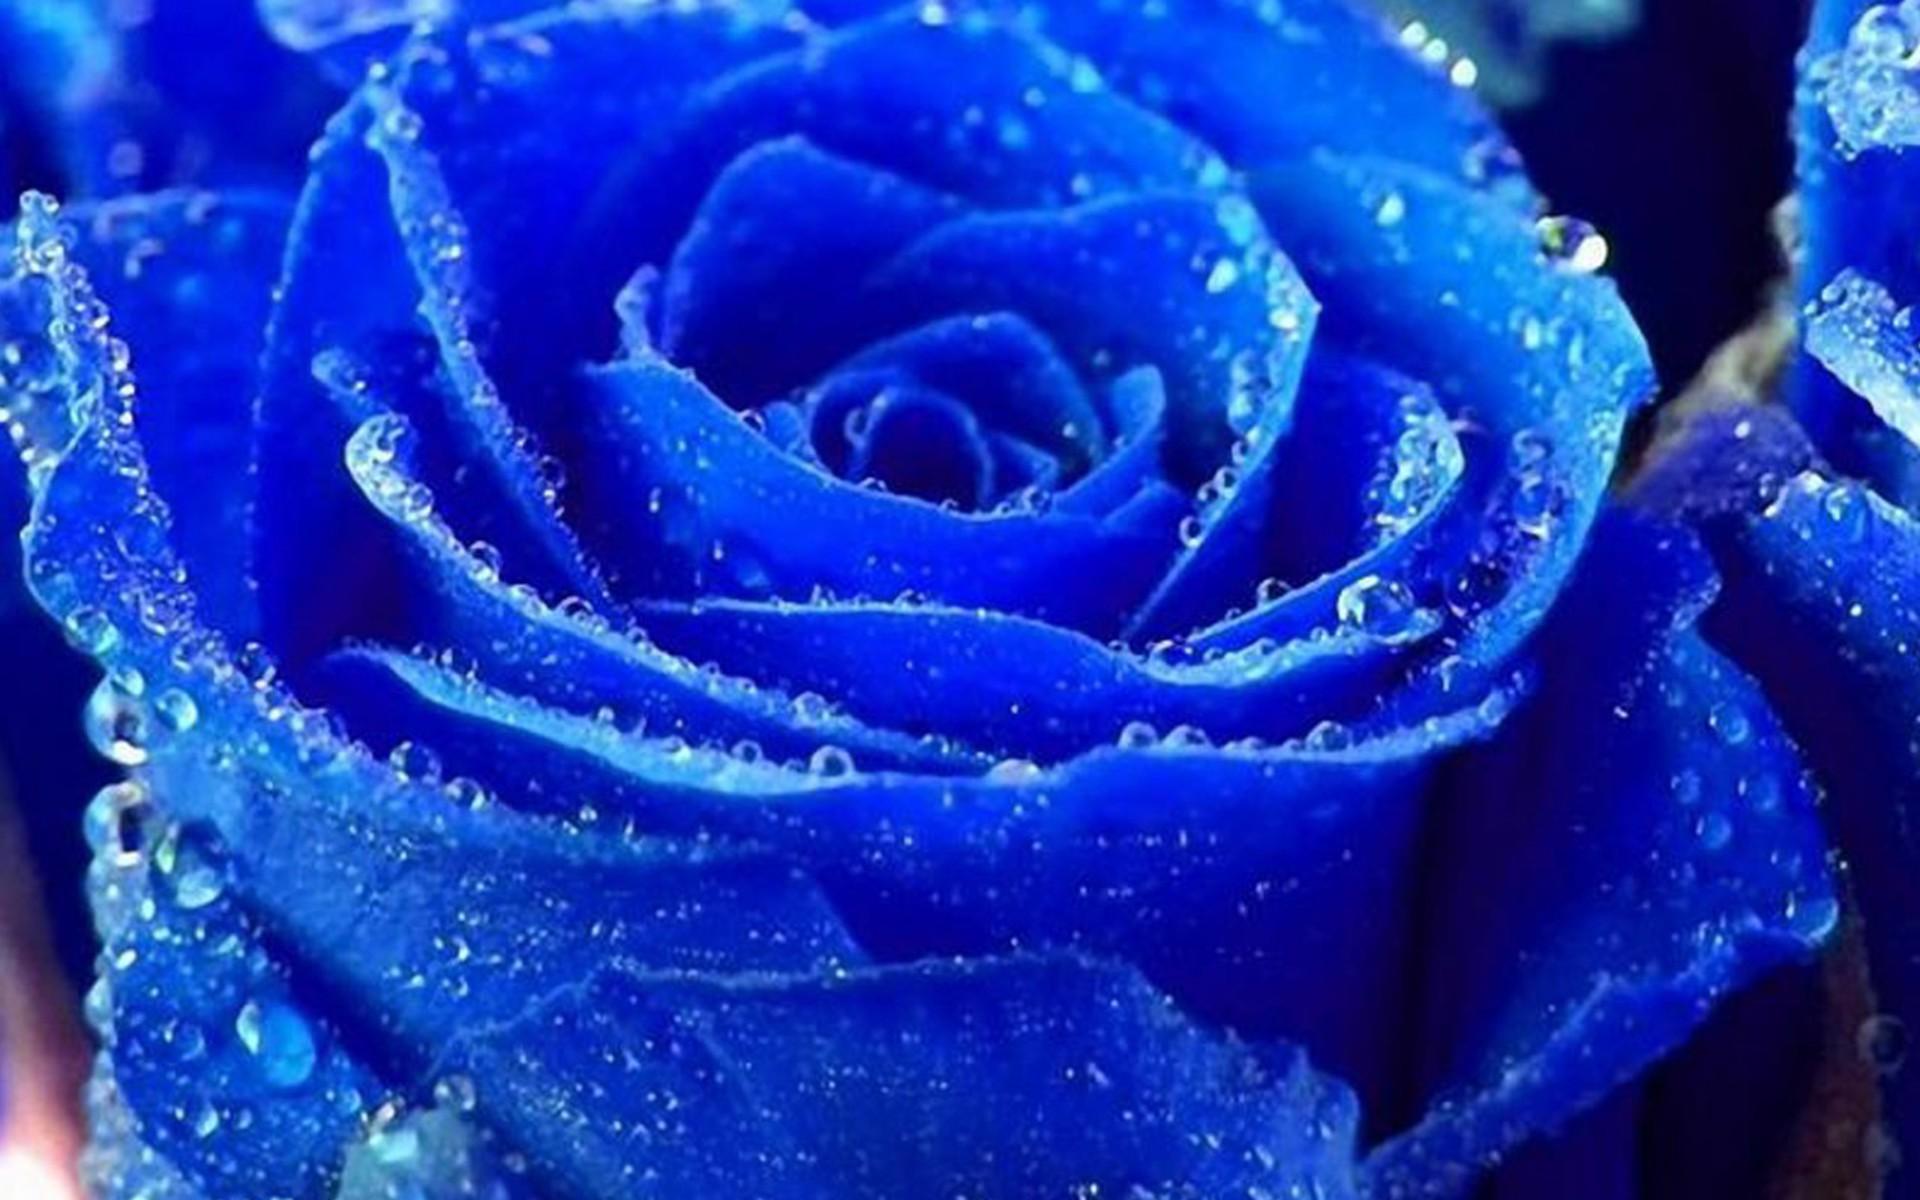 Blue Roses Wallpaper, High Definition, High Quality